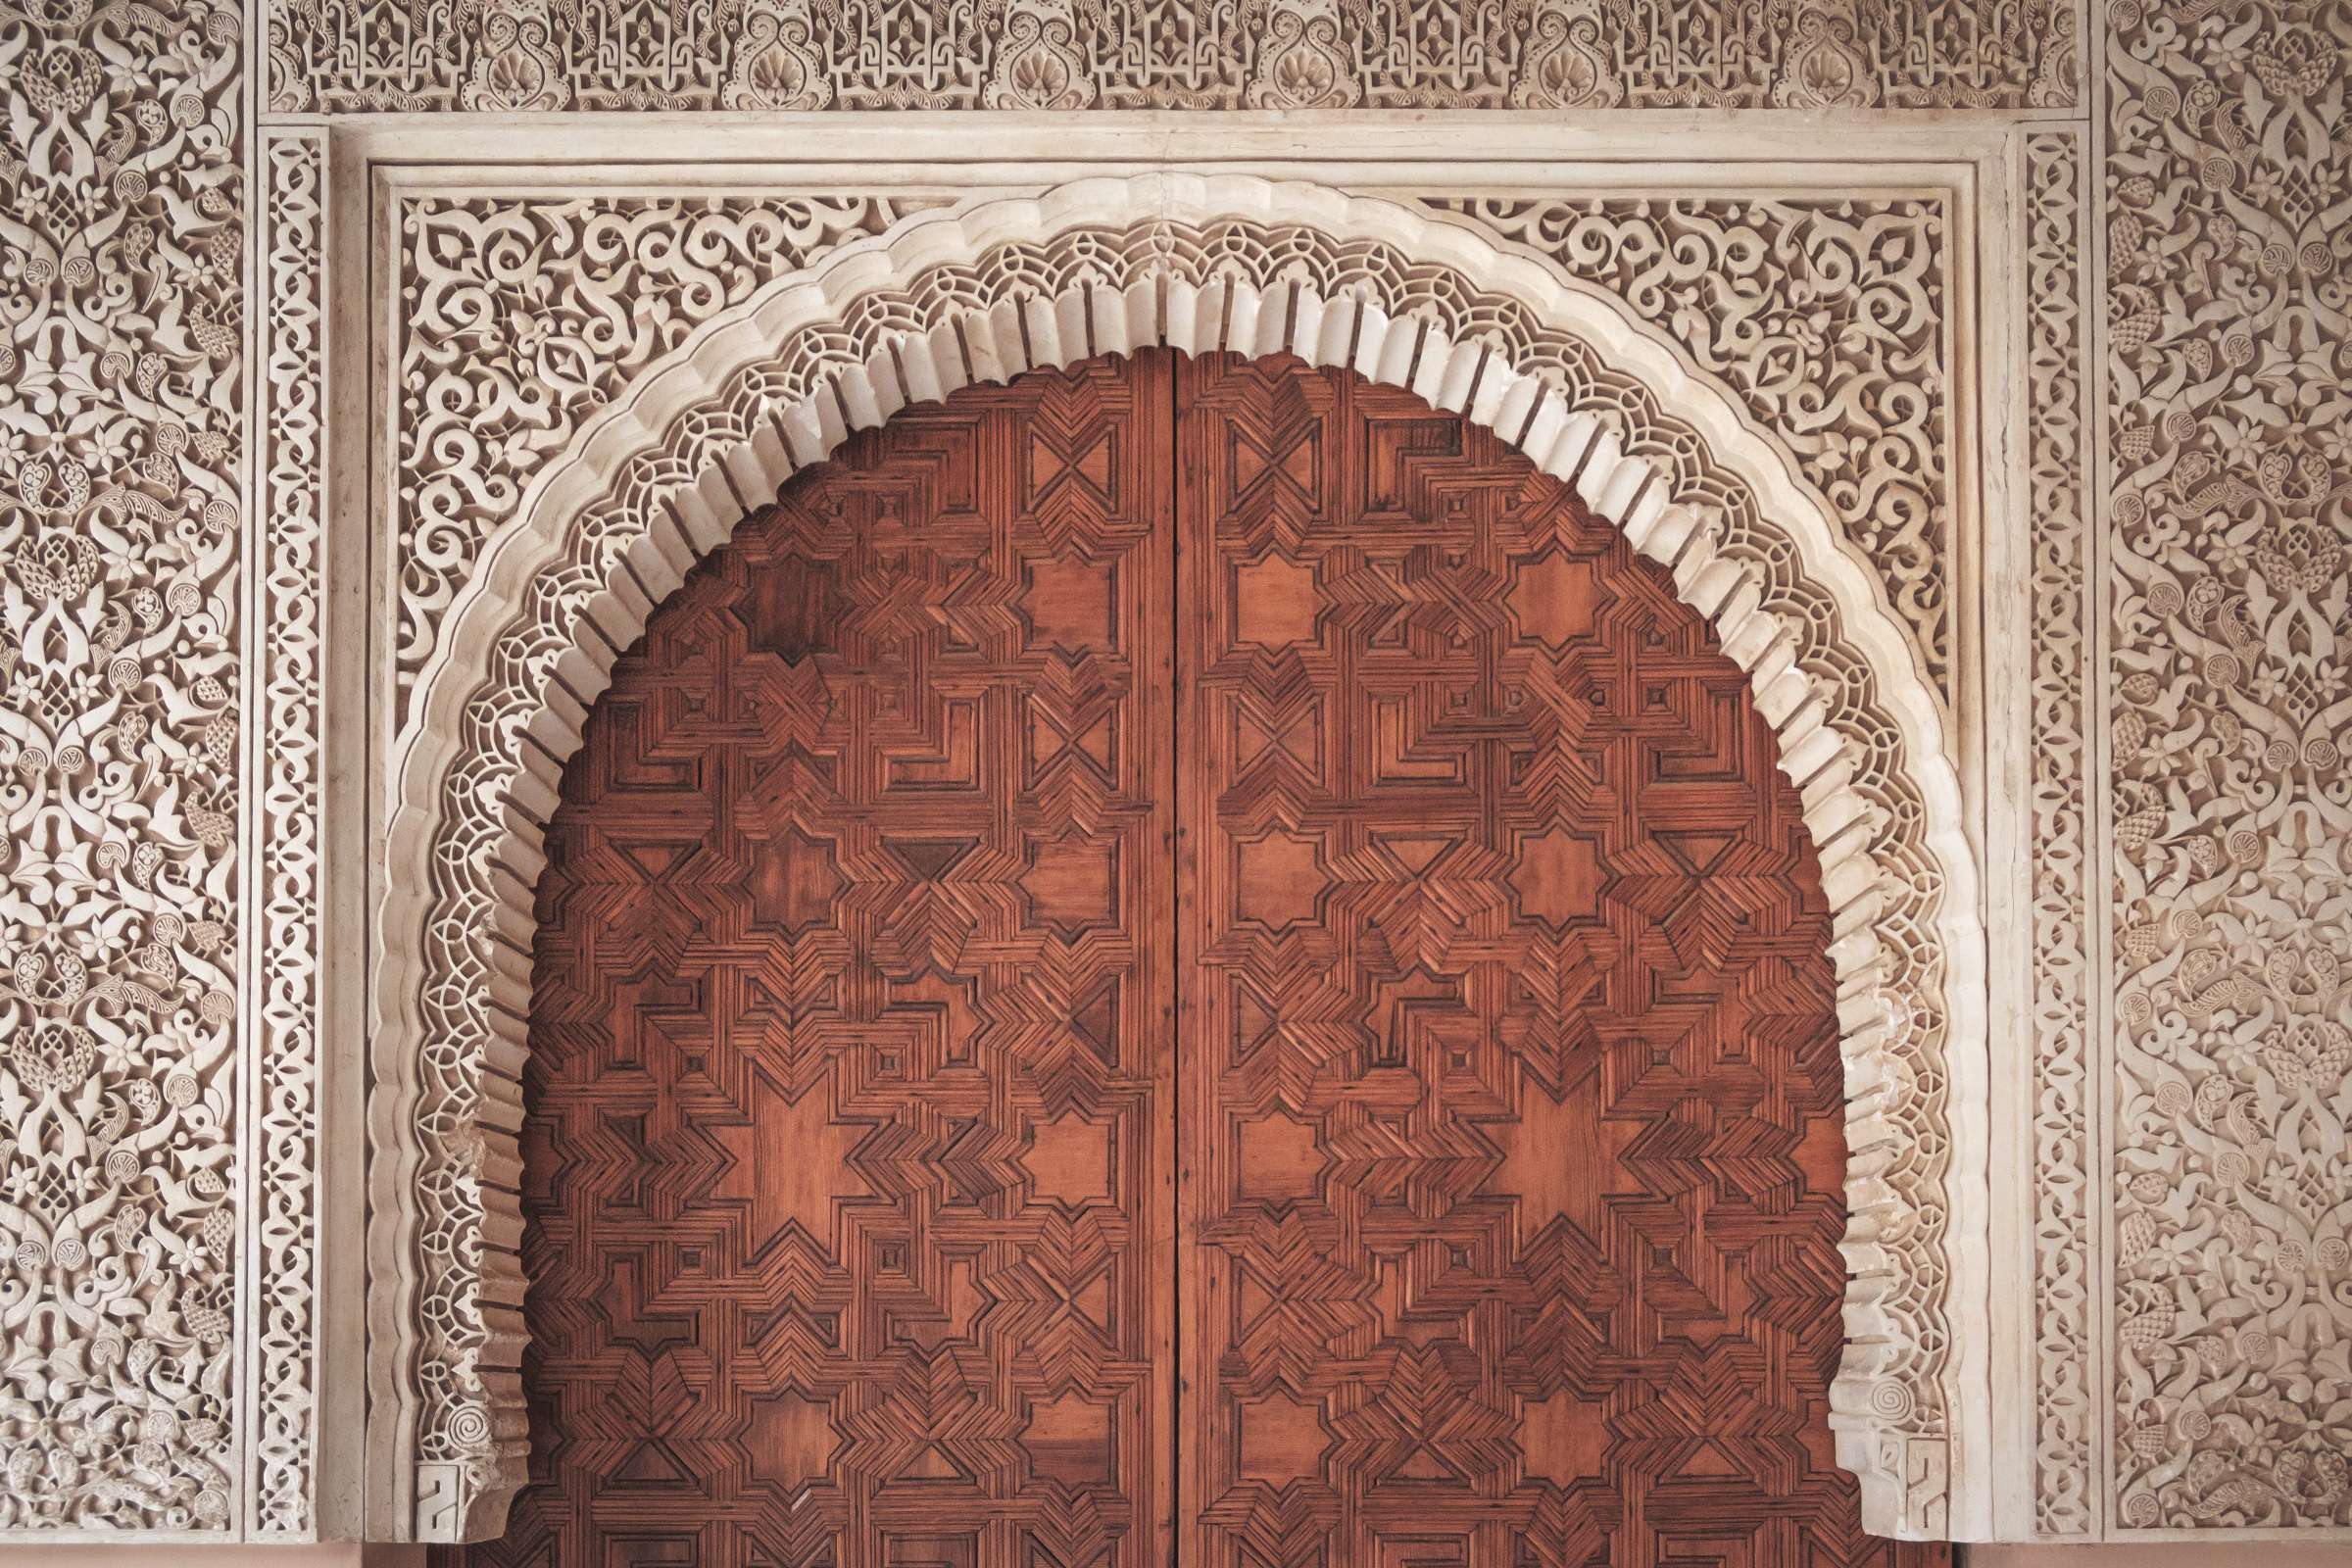 Intricately carved arched door, The Alhambra, Granada